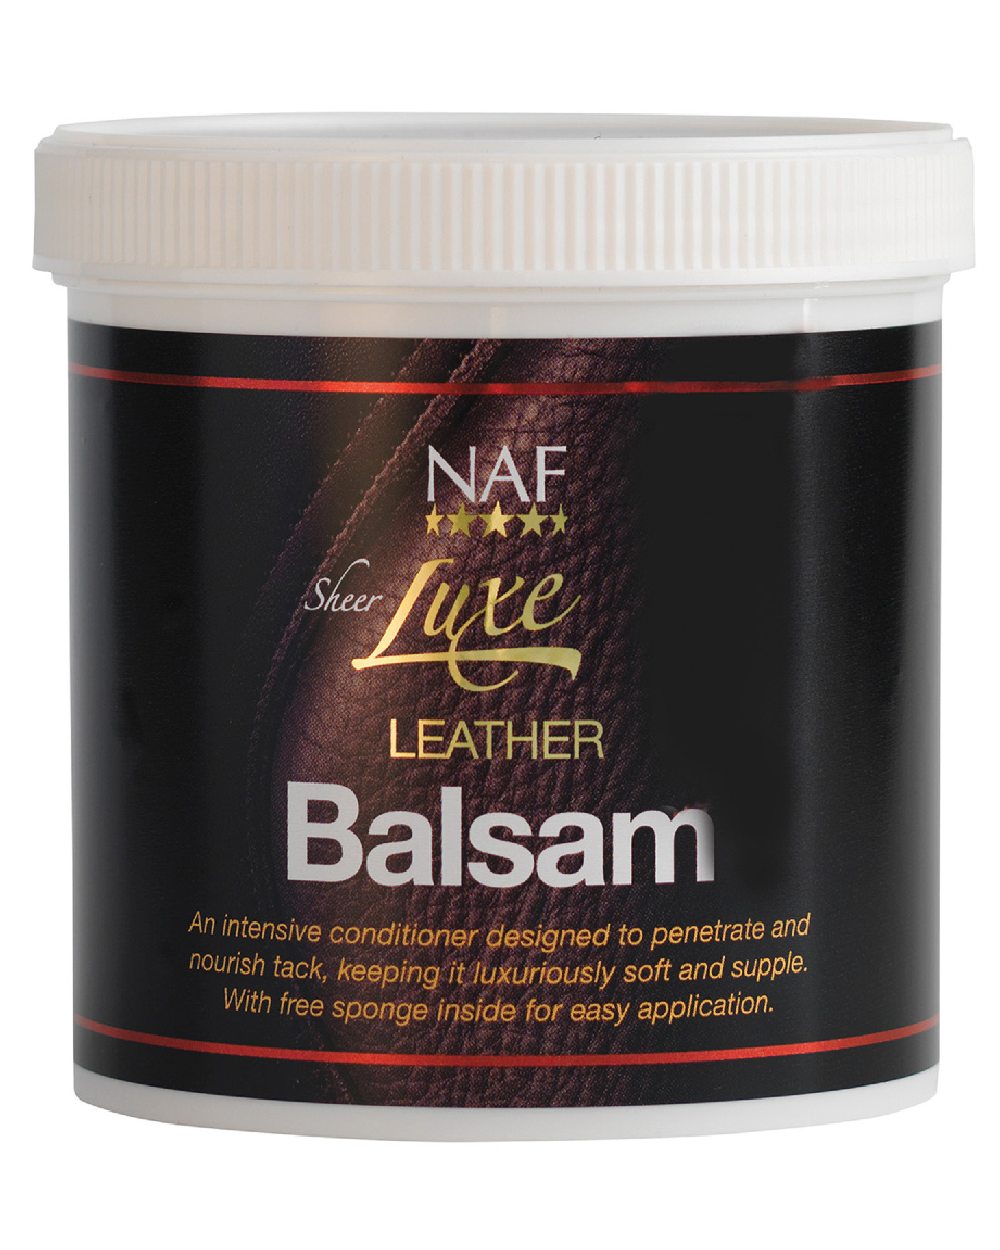 NAF Sheer Luxe Leather Balsam 400g on white background